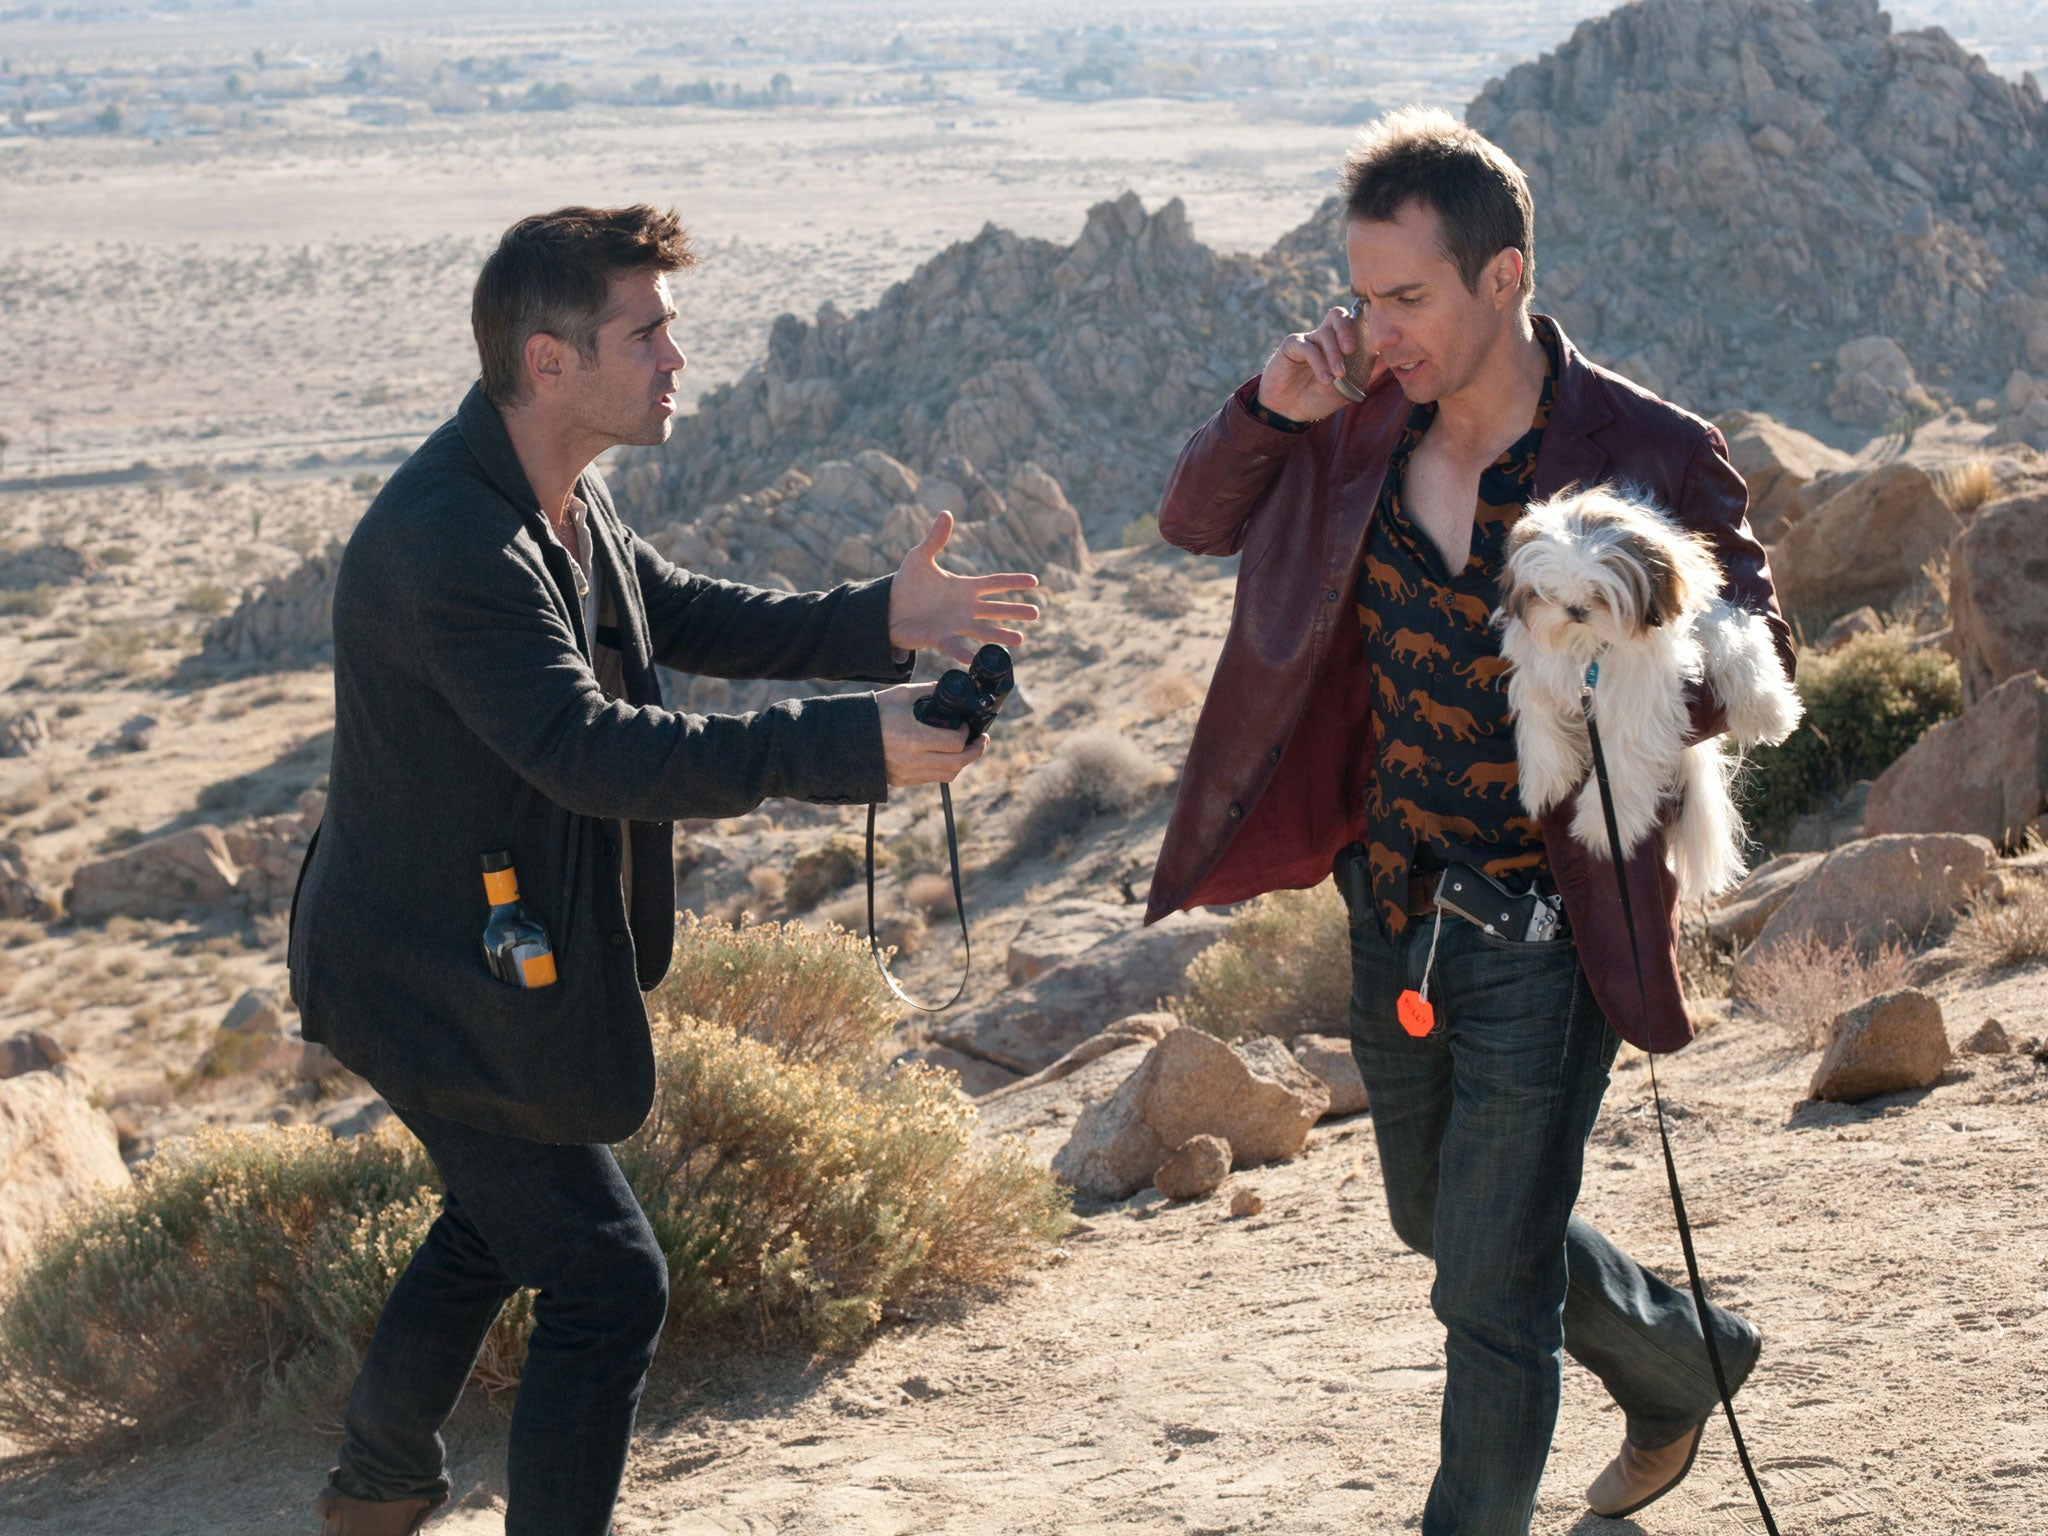 Call of the wild: Colin Farrell and Sam Rockwell in 'Seven Psychopaths'